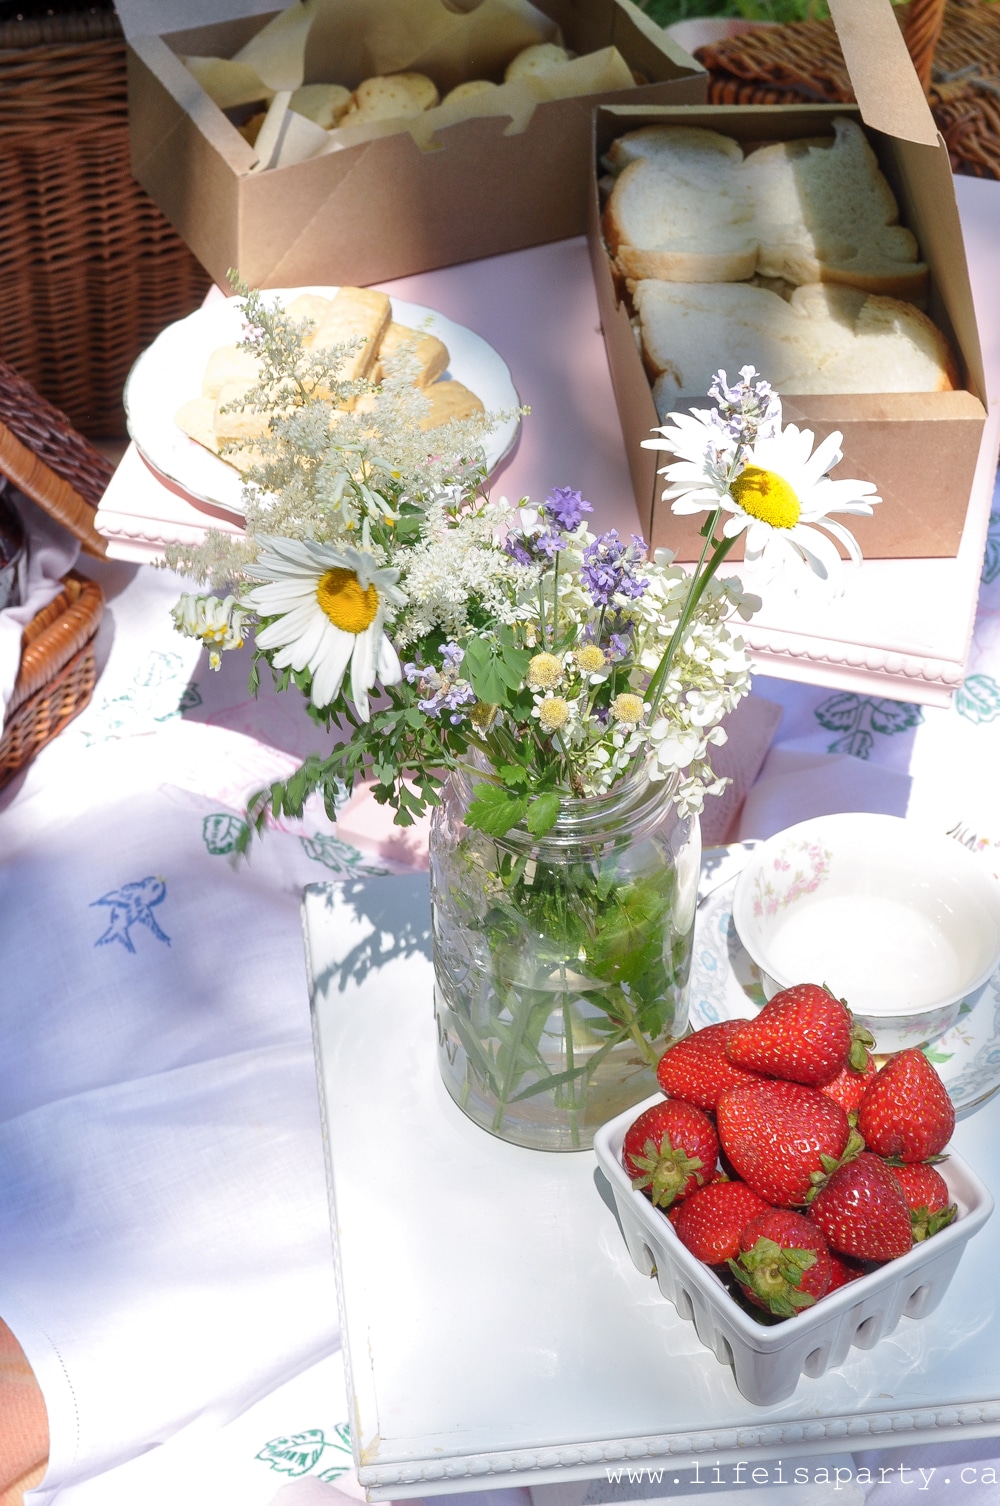 English inspired picnic includes tea sandwiches, home-made scotch eggs, scones and cream, shortbread, empire cookies, custard creams, vintage decor and lots and lots of tea.